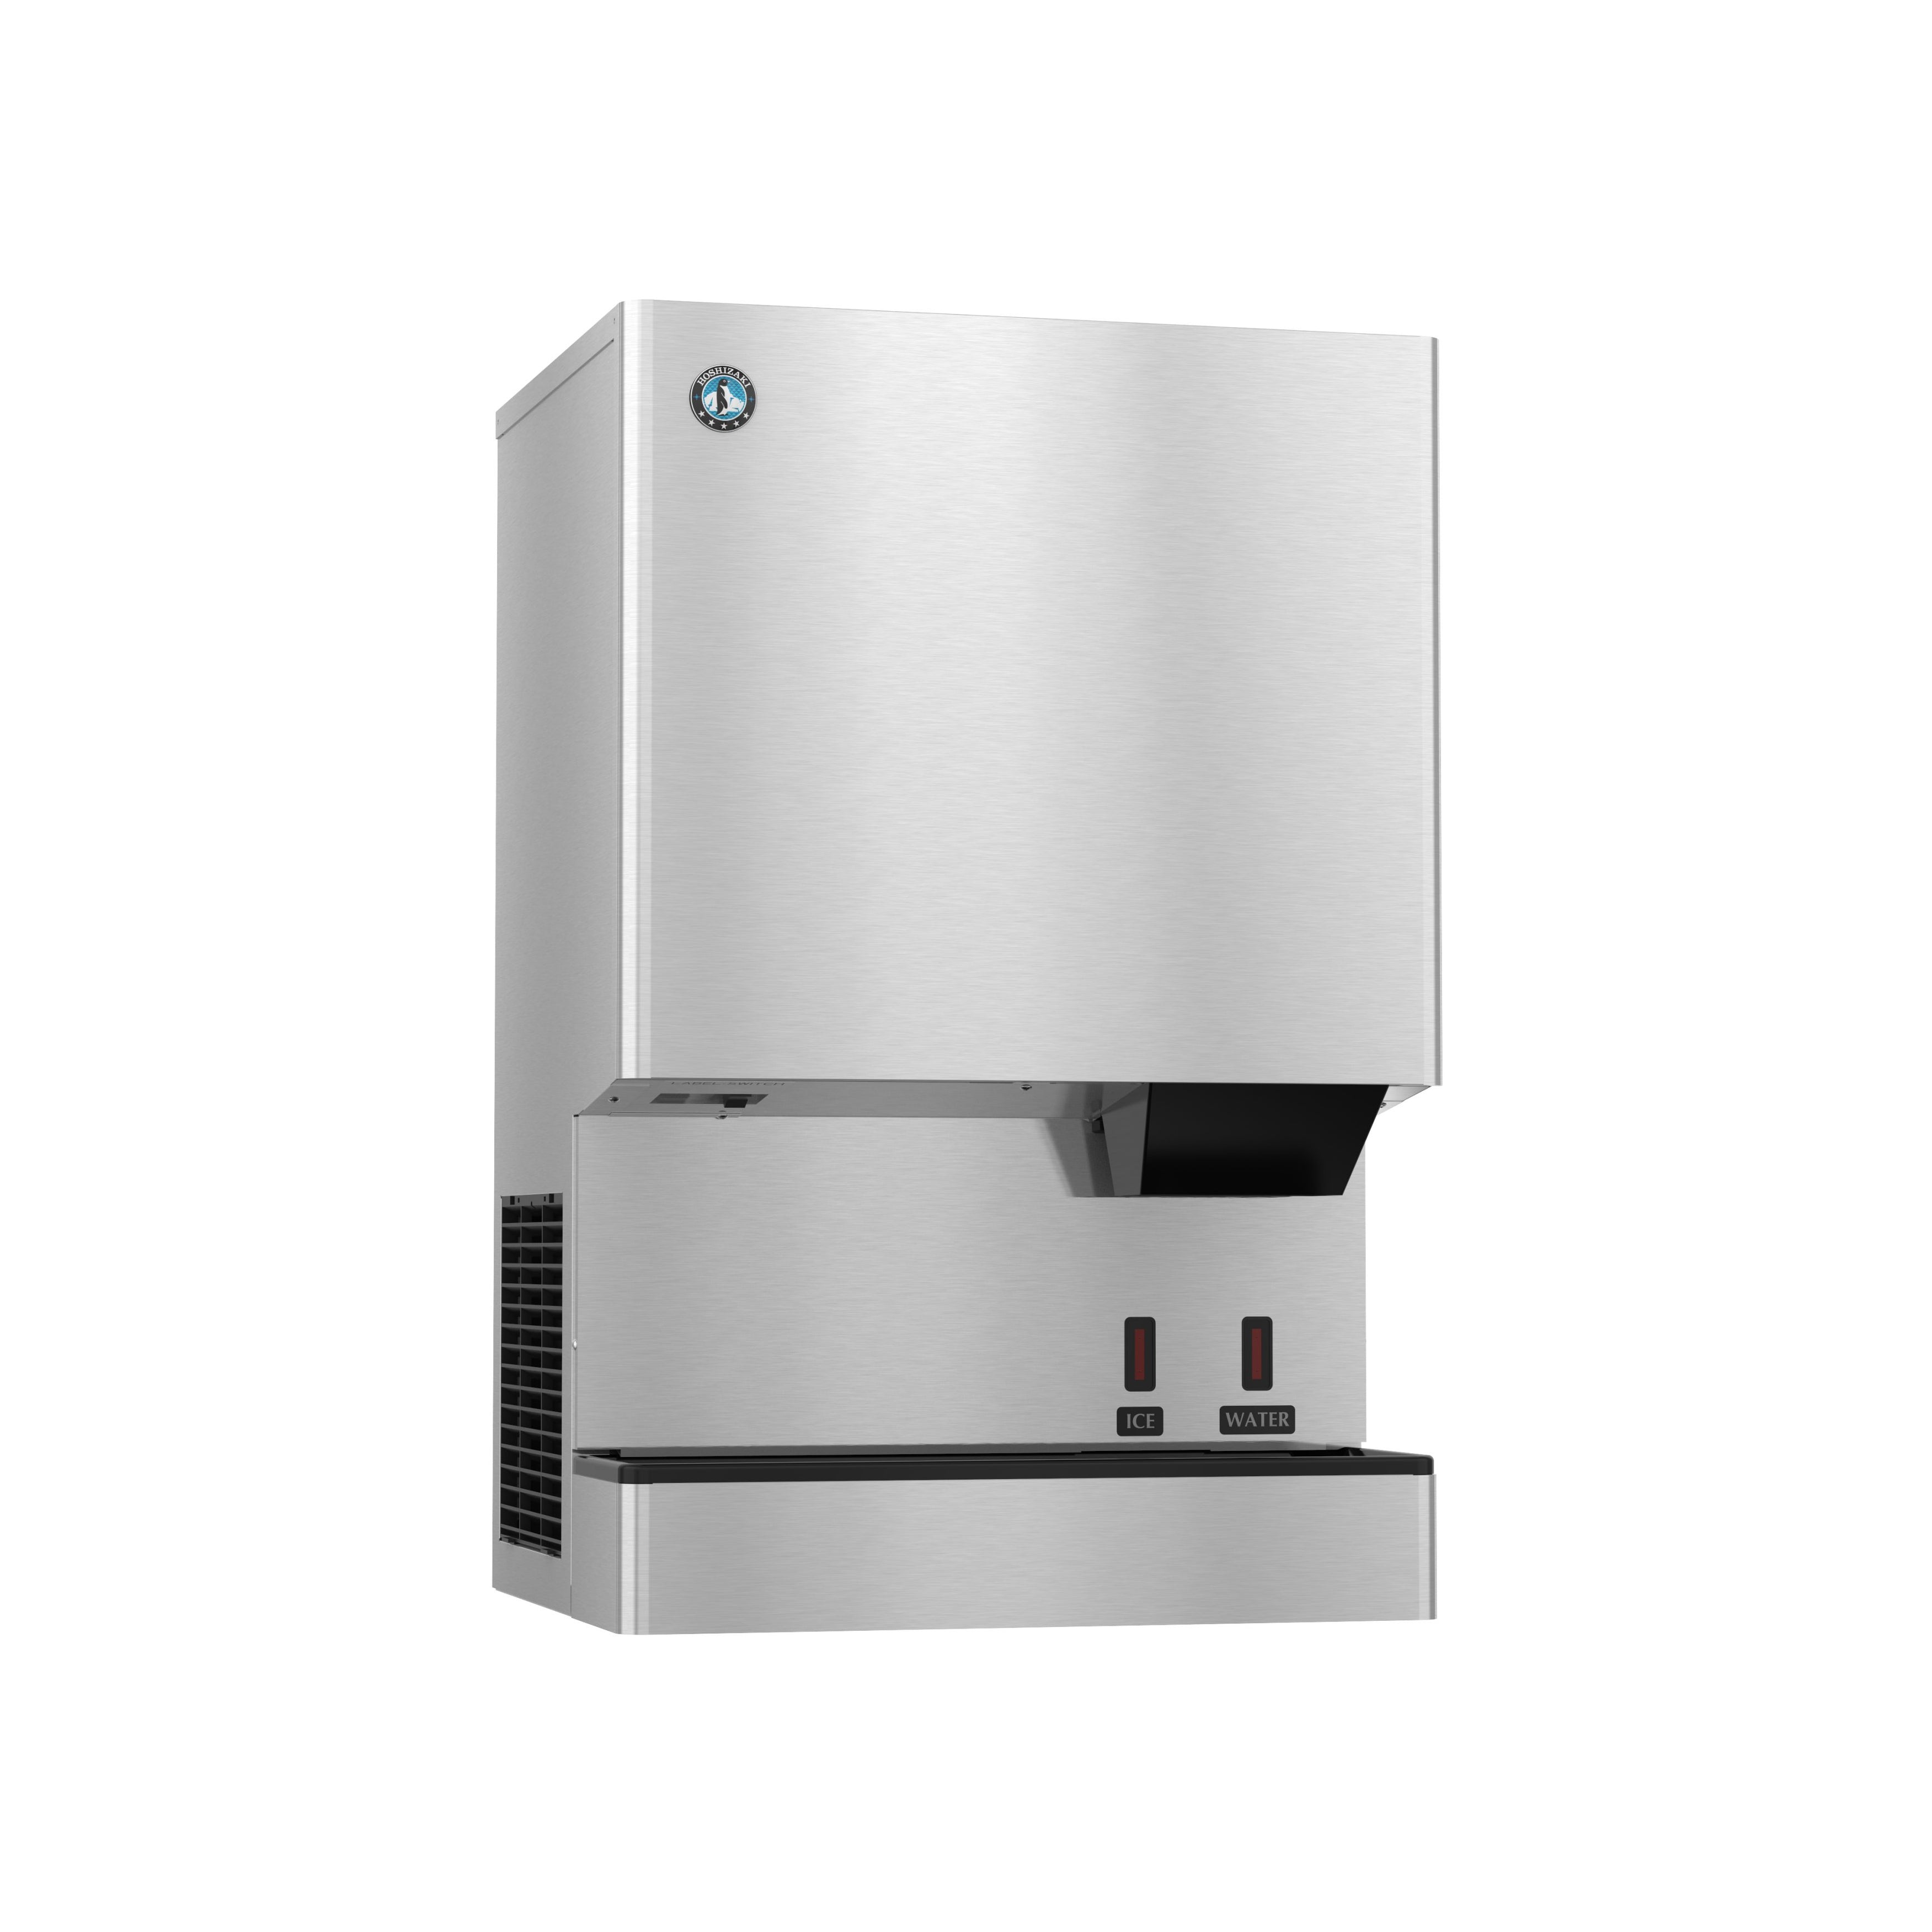 Hoshizaki - DCM-300BAH, Commercial Countertop Ice Maker and Water Dispenser - 40 lb. Storage Air Cooled